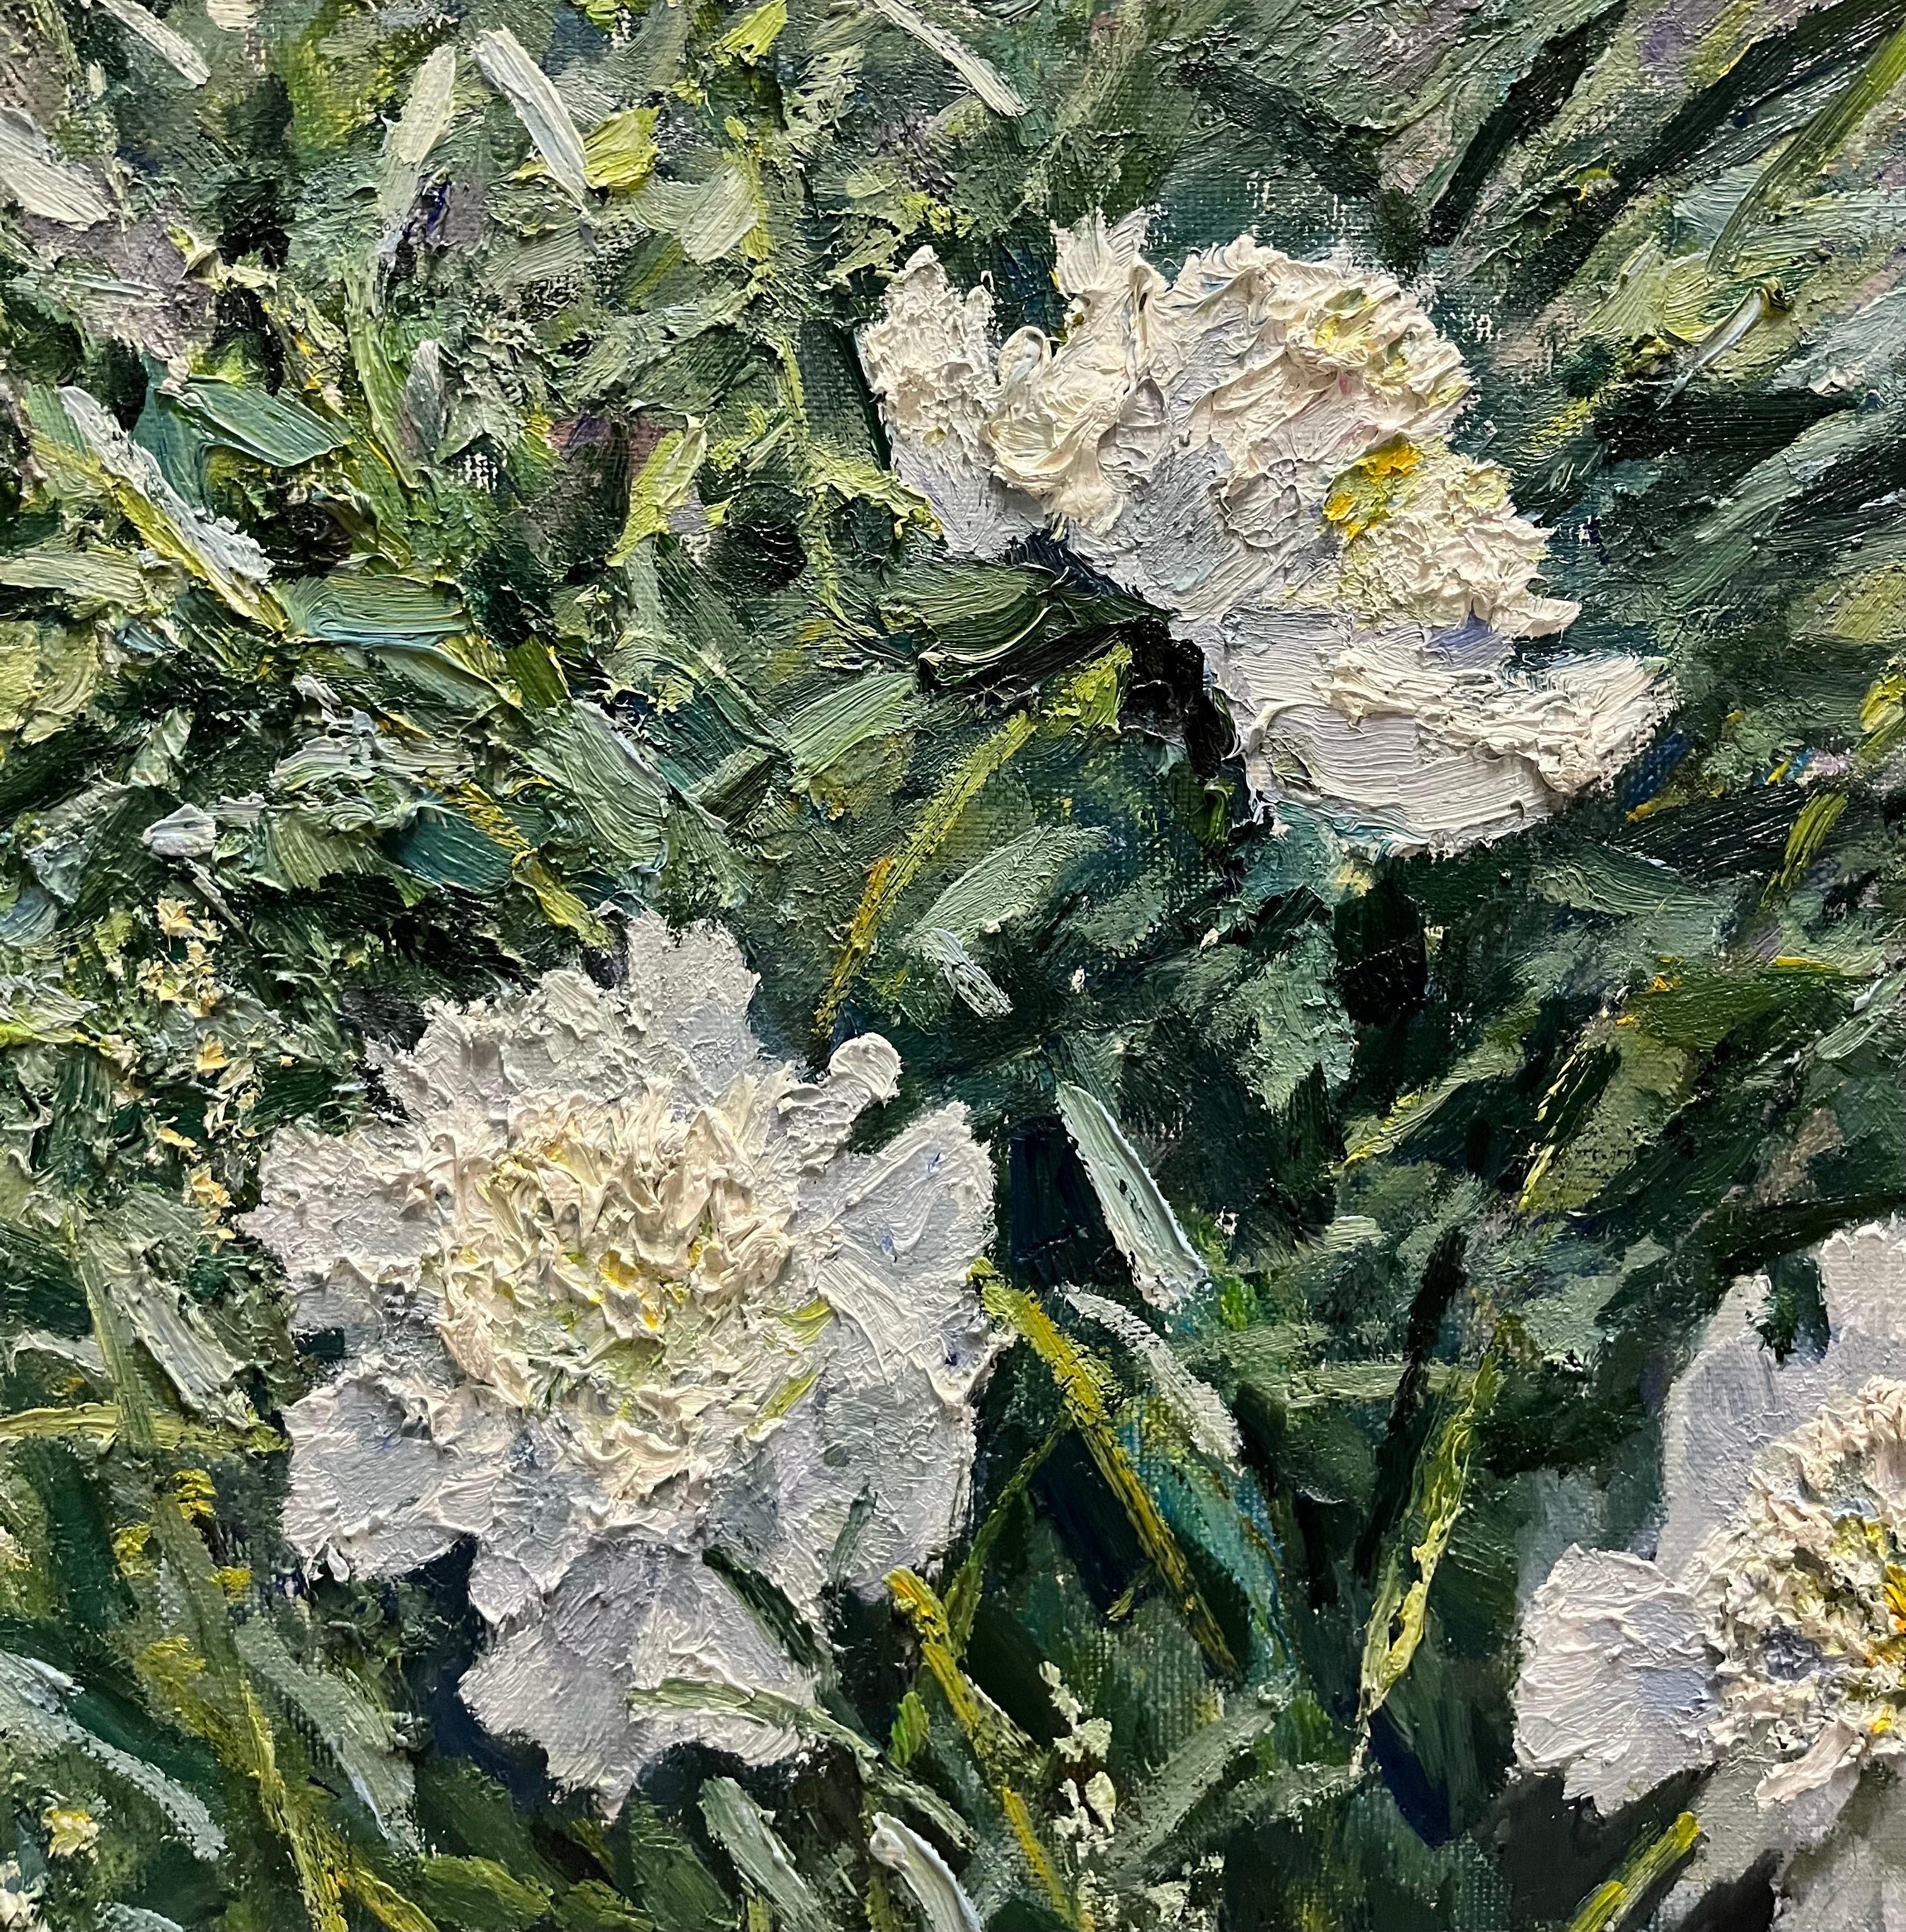 Peonies, white,green
Georgij MOROZ (Dneprodzerzinsk, Ucraina, 1937 - St. Petersburg, 2015)

1937: he was born in Dneprodzerzinsk, Ucraina.
1949-56: he began artistic studies in Dneprodzerzinsk and later he attended the School of Fine Arts in